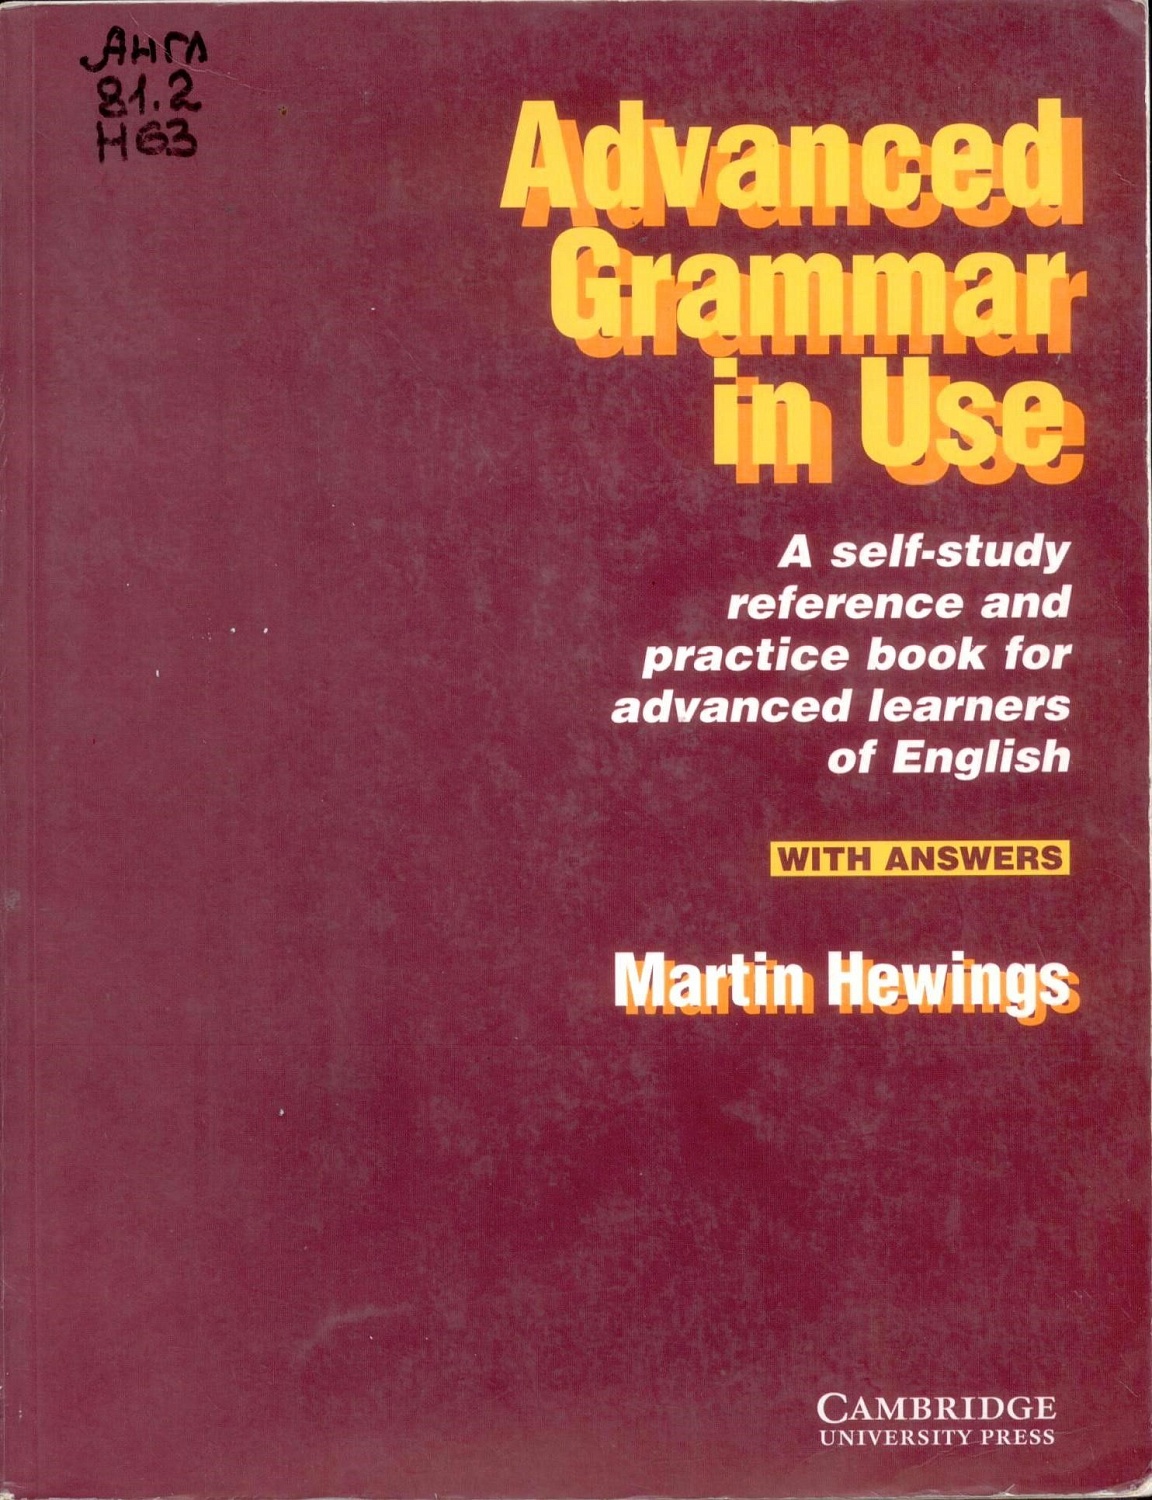 Англ 81.2 H 63 Advanced Grammar in Use: a self-study reference and practice book for advanced learners of English with answers / Martin Hewings. – Cambridge: Cambridge University Press, 2000. – 340 p.: ill.